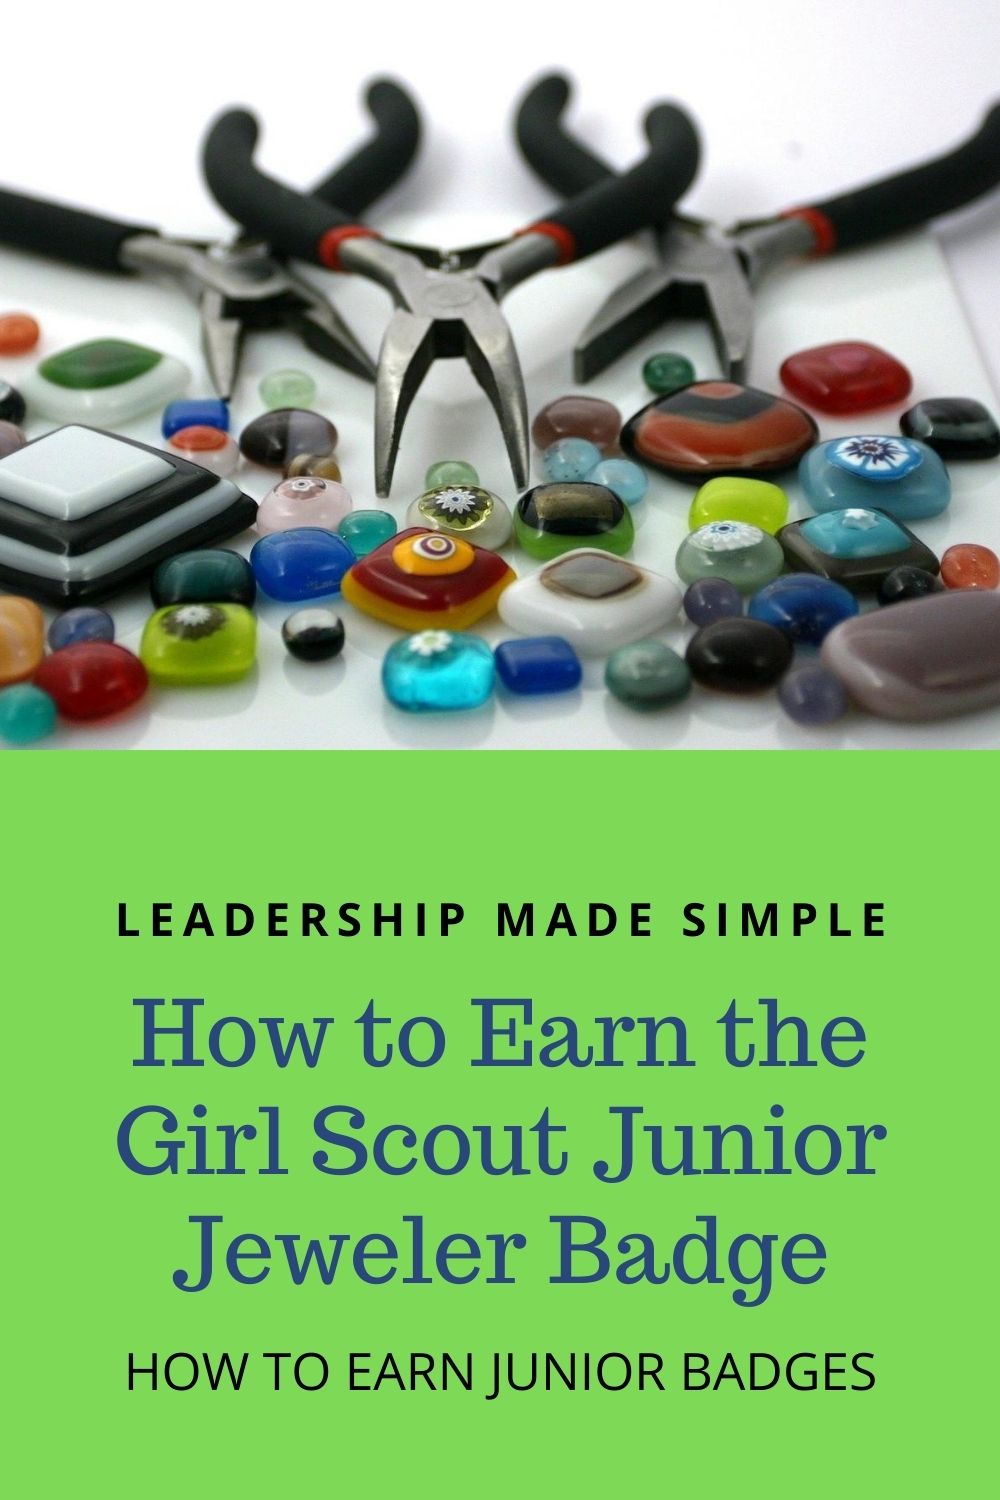 The Best Way to Easily Attach Badges for Girl Scouts